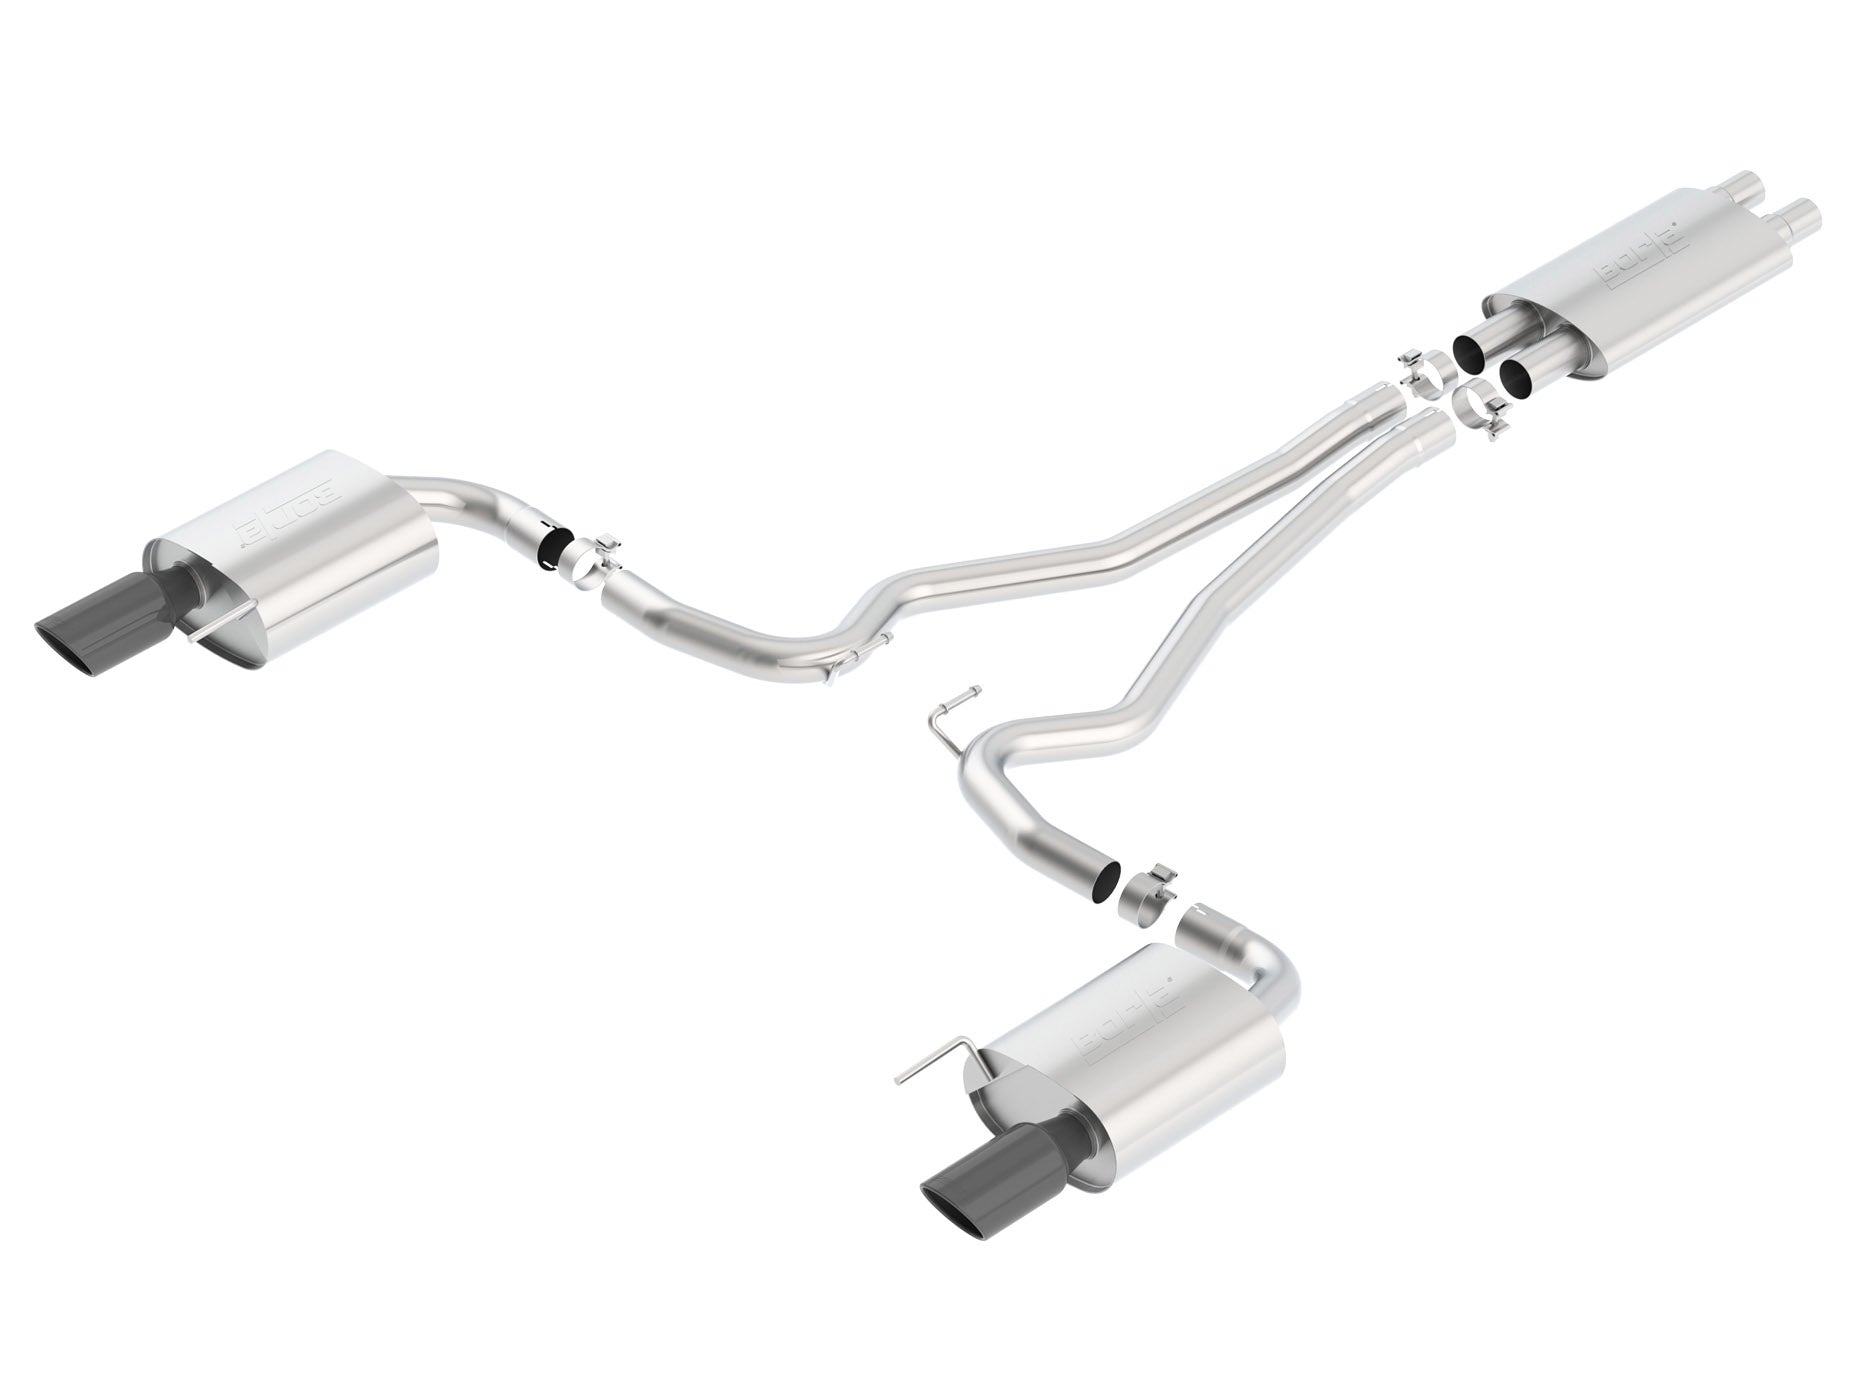 BORLA 140589BC Cat Back Exhaust System, Mustang GT V8-5.0L, Tip №49, 2015-16, sound Touring Photo-1 